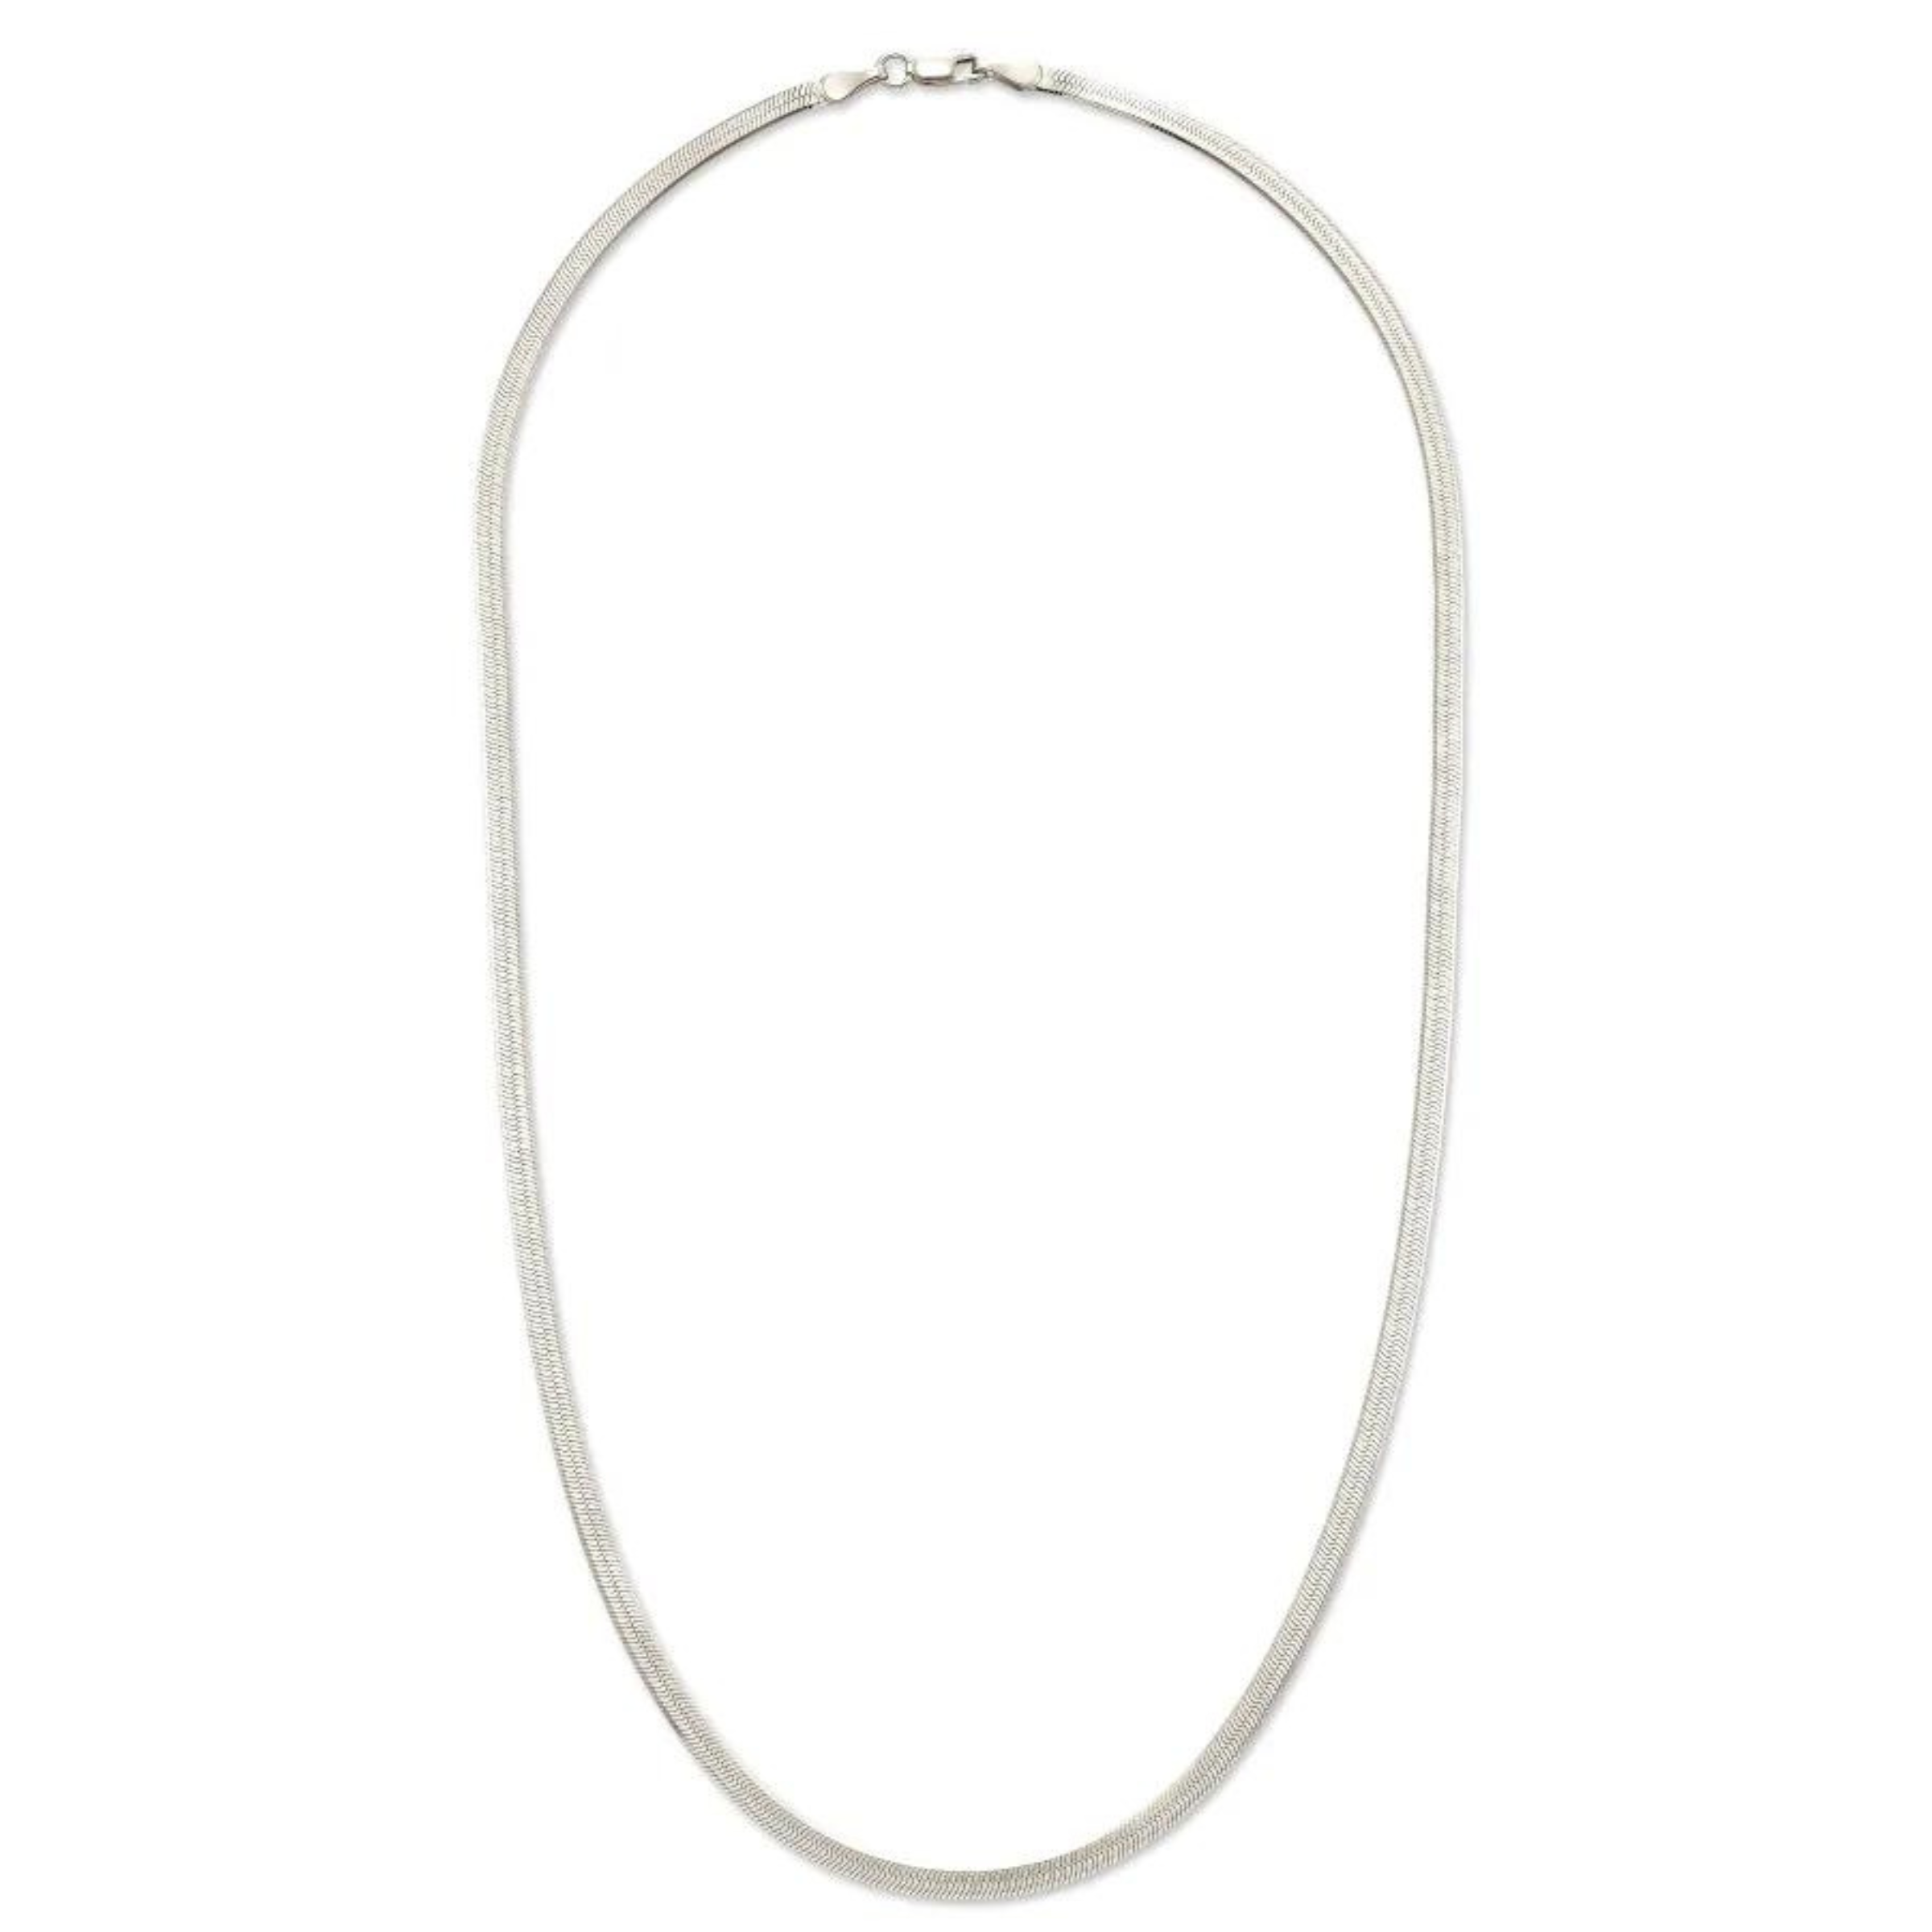 Kendra Scott | Herringbone Chain Necklace in Sterling Silver - Giddy Up Glamour Boutique